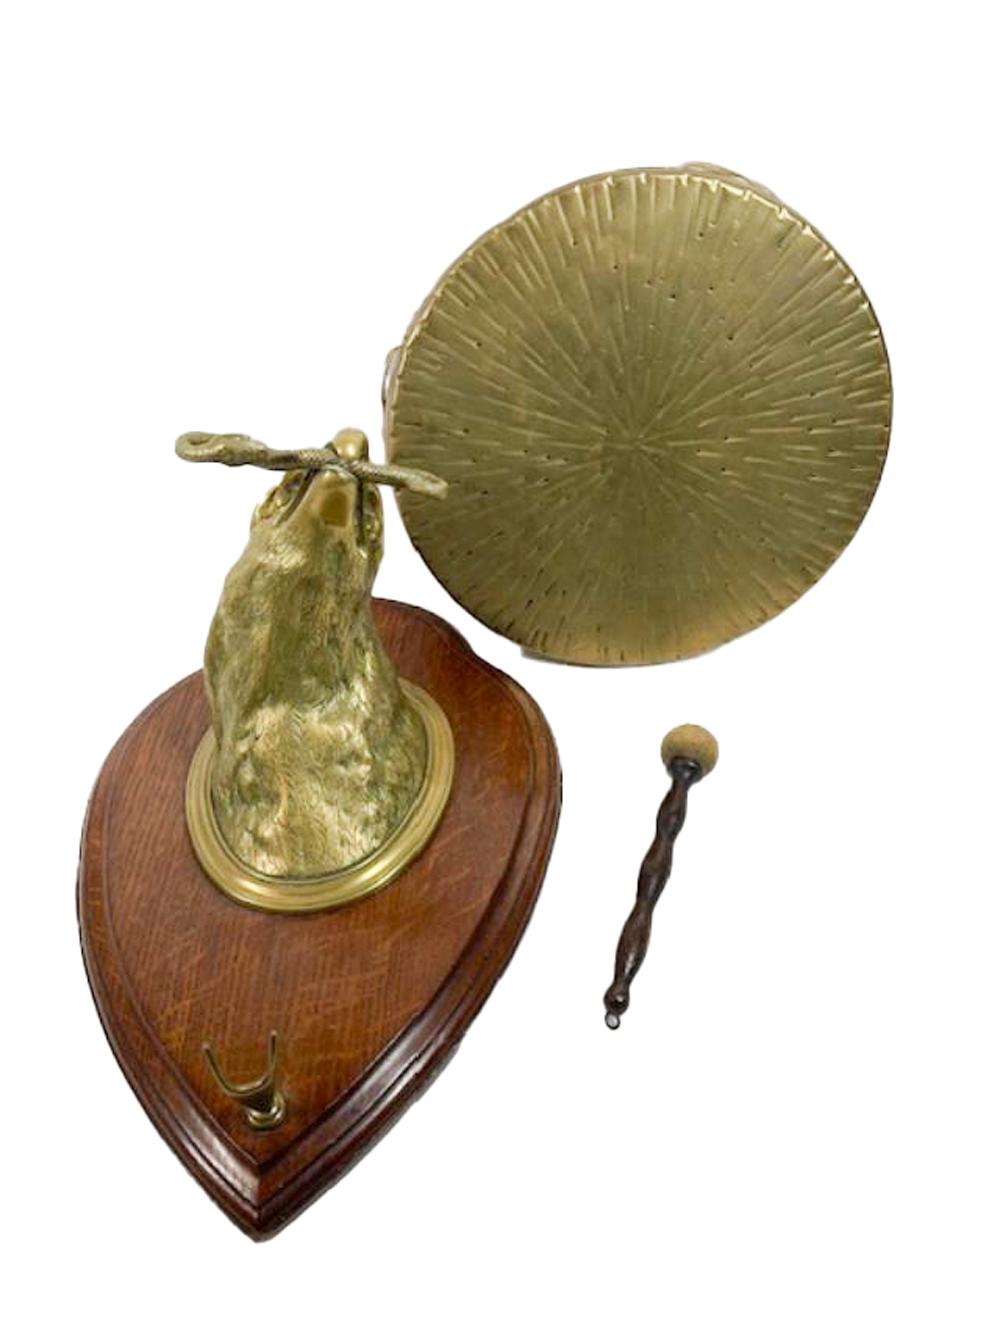 Wall Mounted Brass Eagle Head on Oak Plaque Holding a Dinner Gong by Wm. Tonks For Sale 9